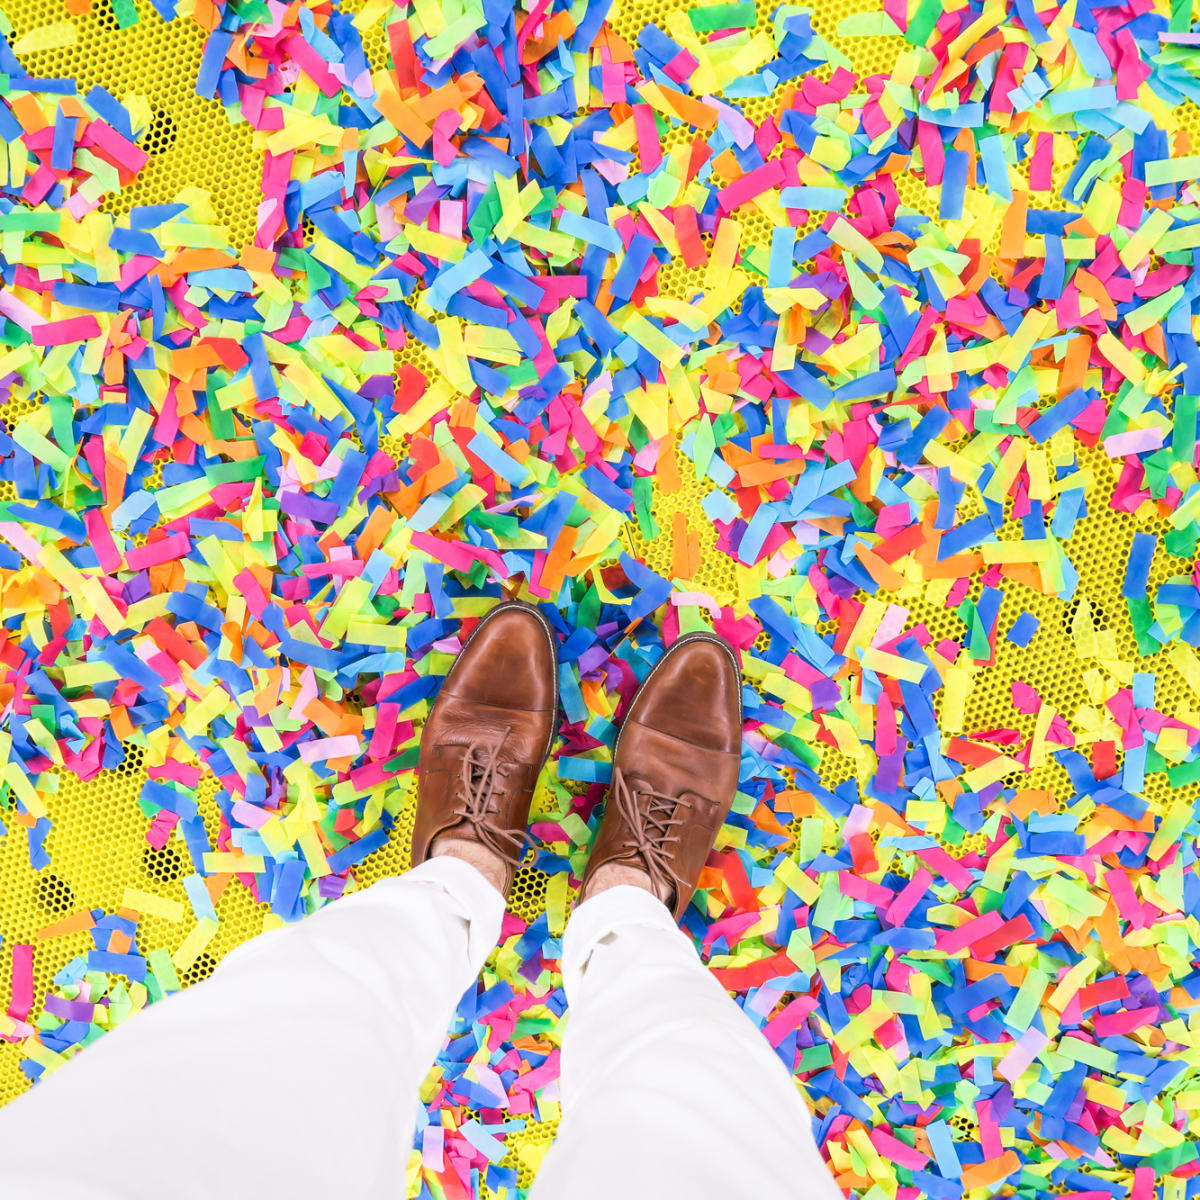 Six Easy Ways to Clean Up Confetti - Men's Journal